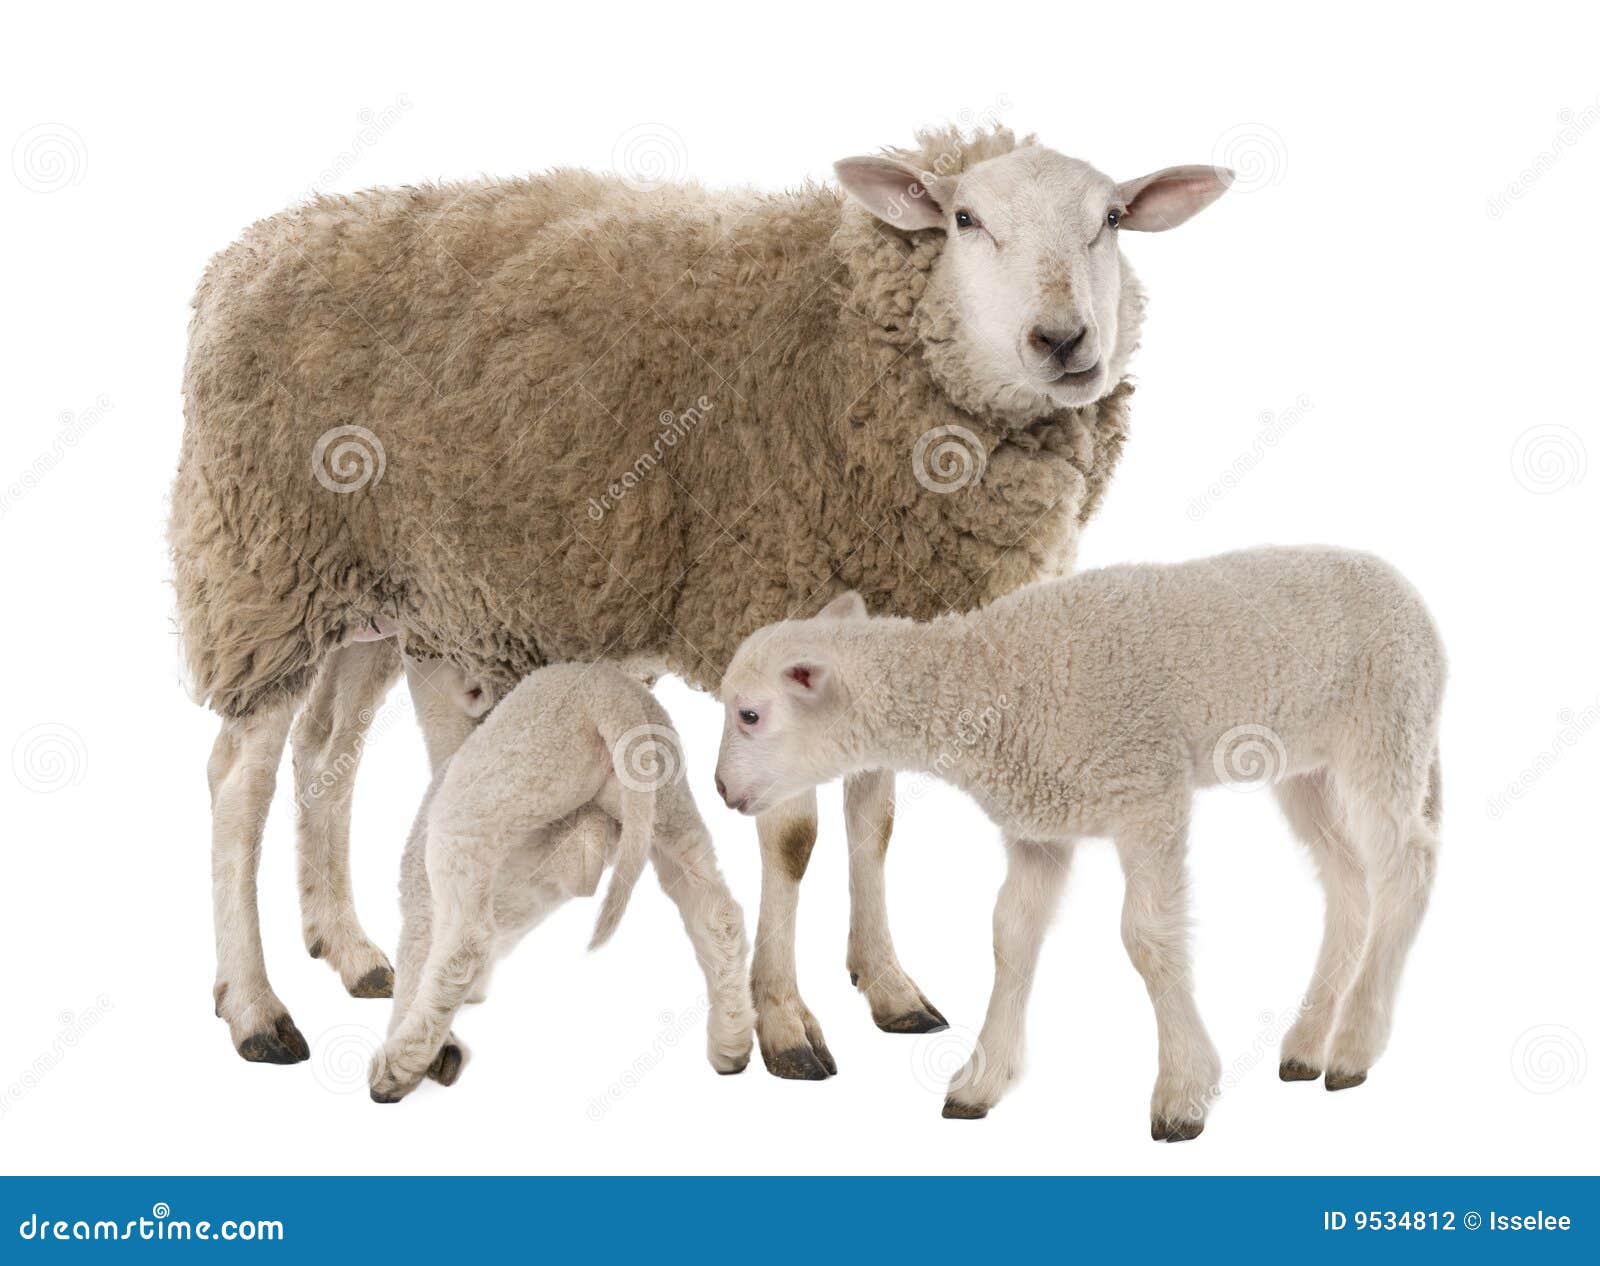 a ewe with her two lambs, one is suckling